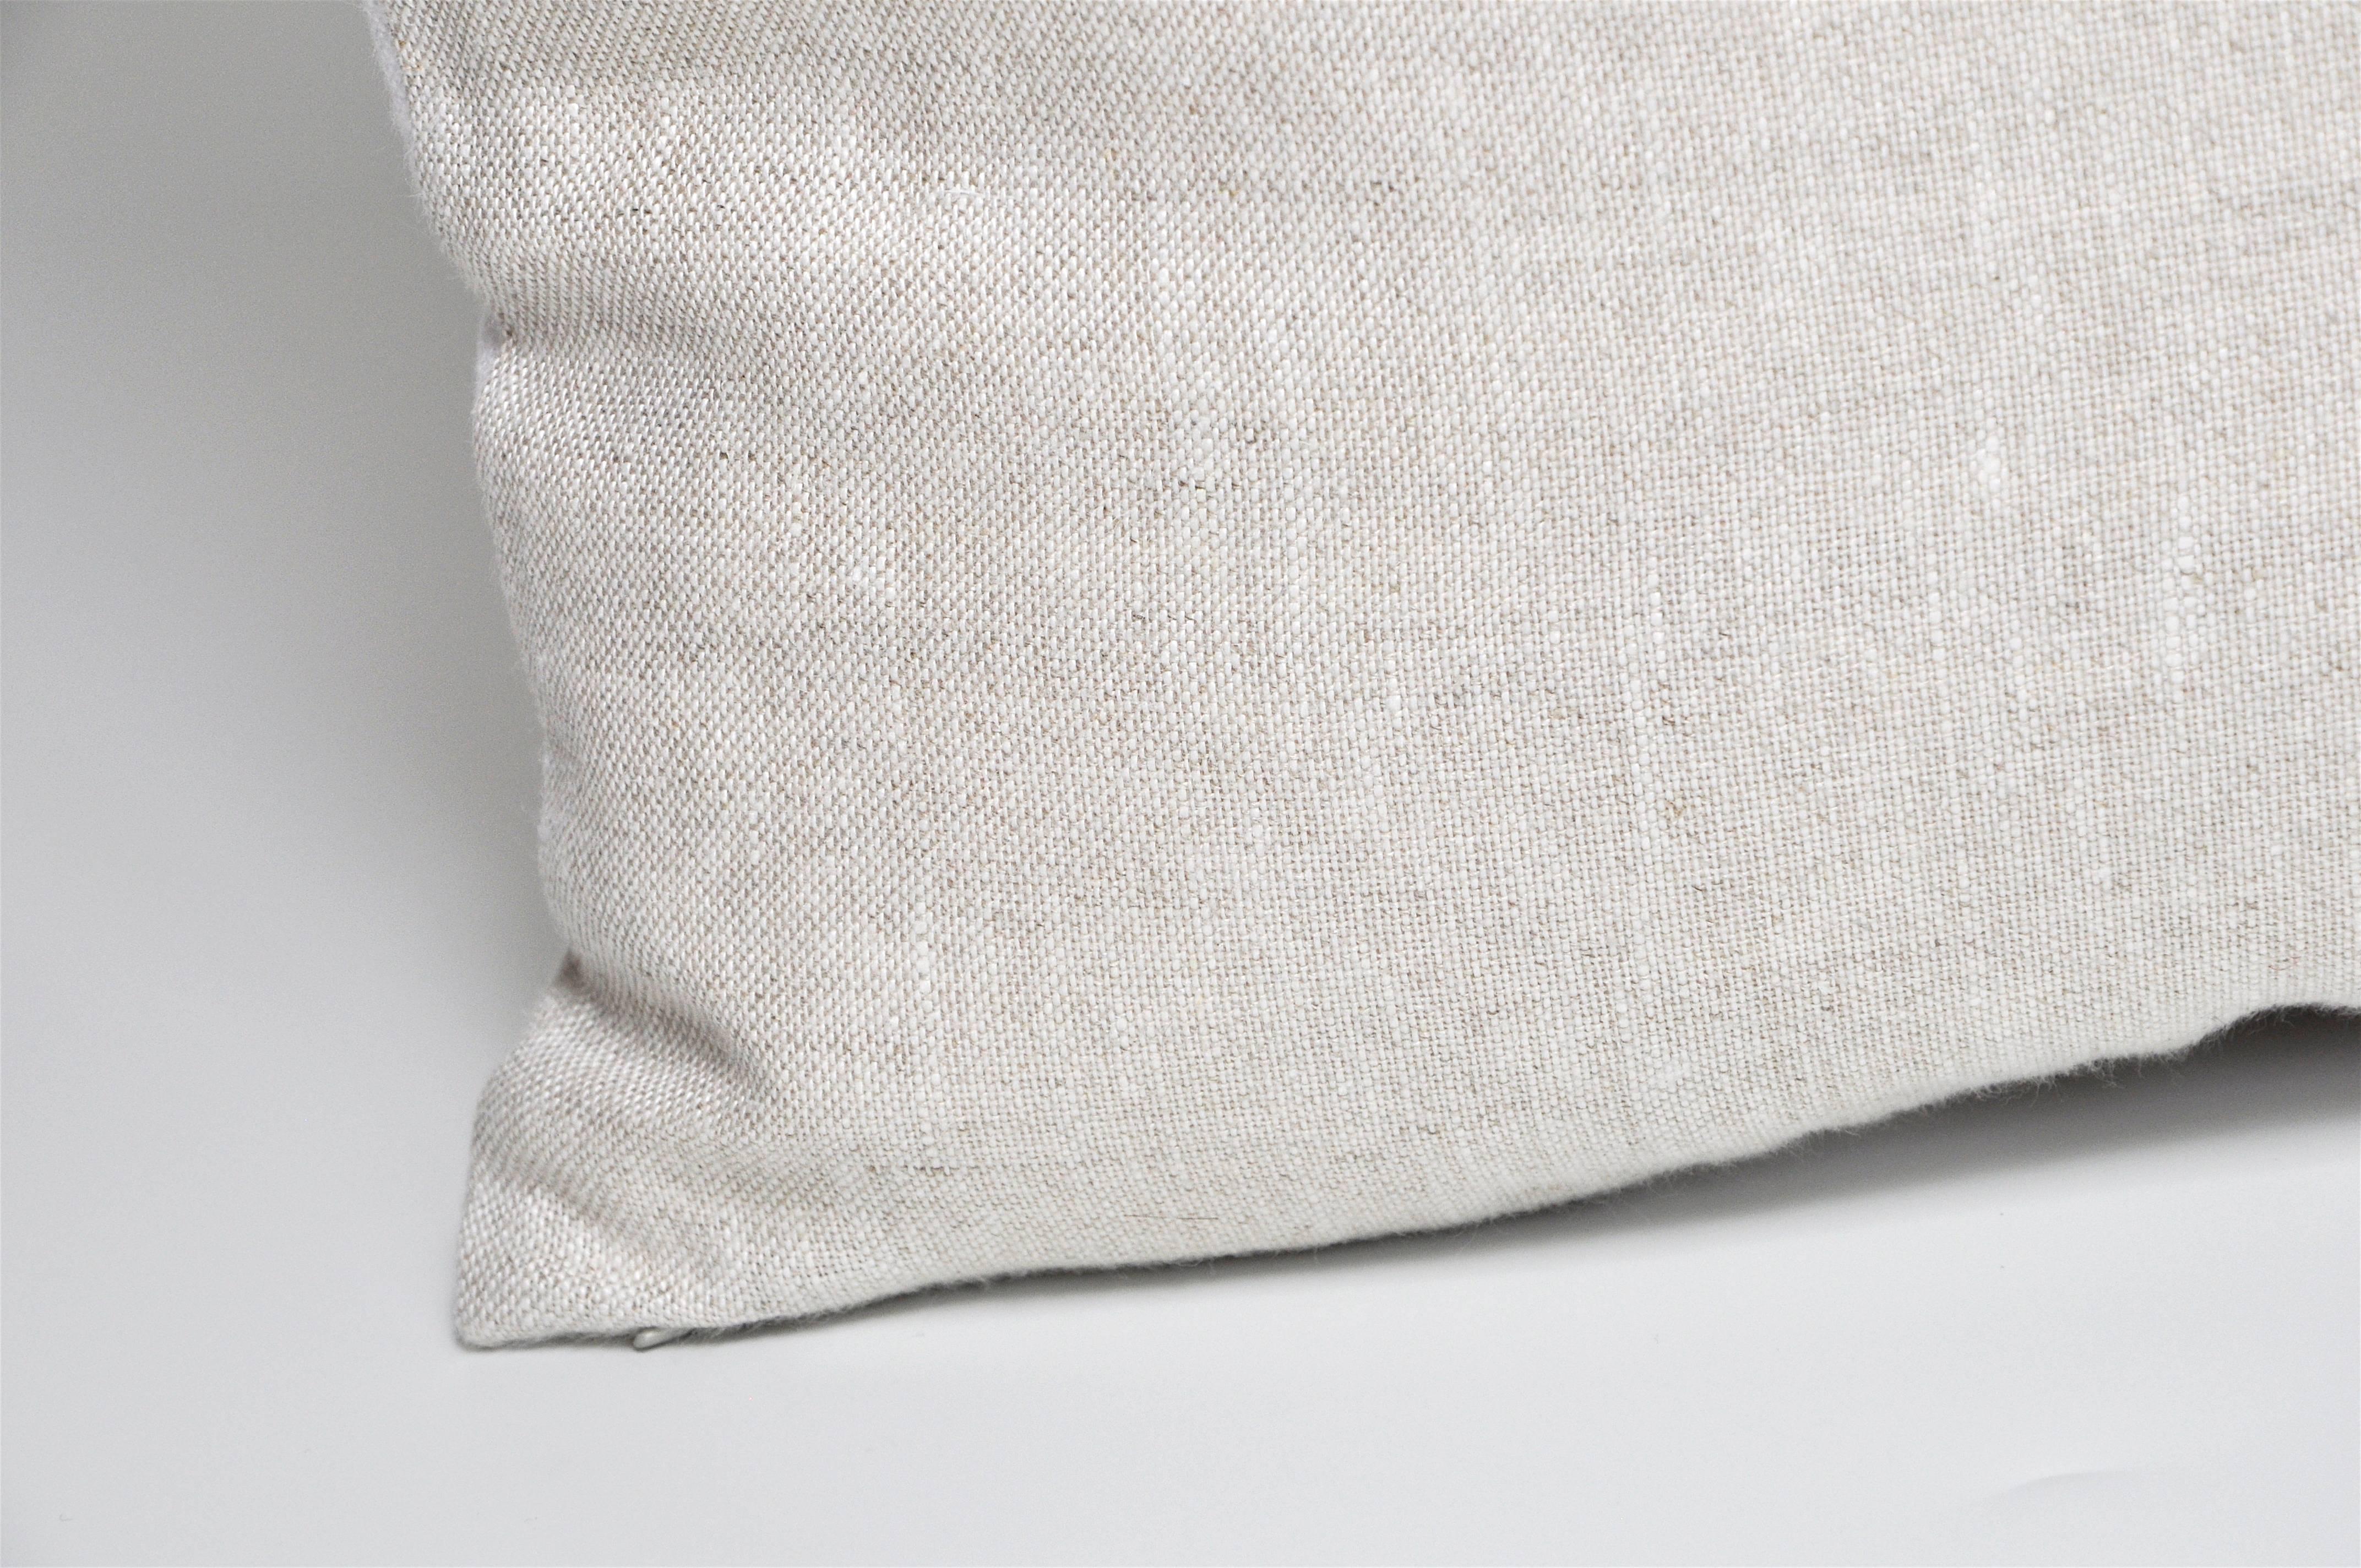 20th Century Vintage Italian Cushion Backed in New Irish Linen Pillow For Sale